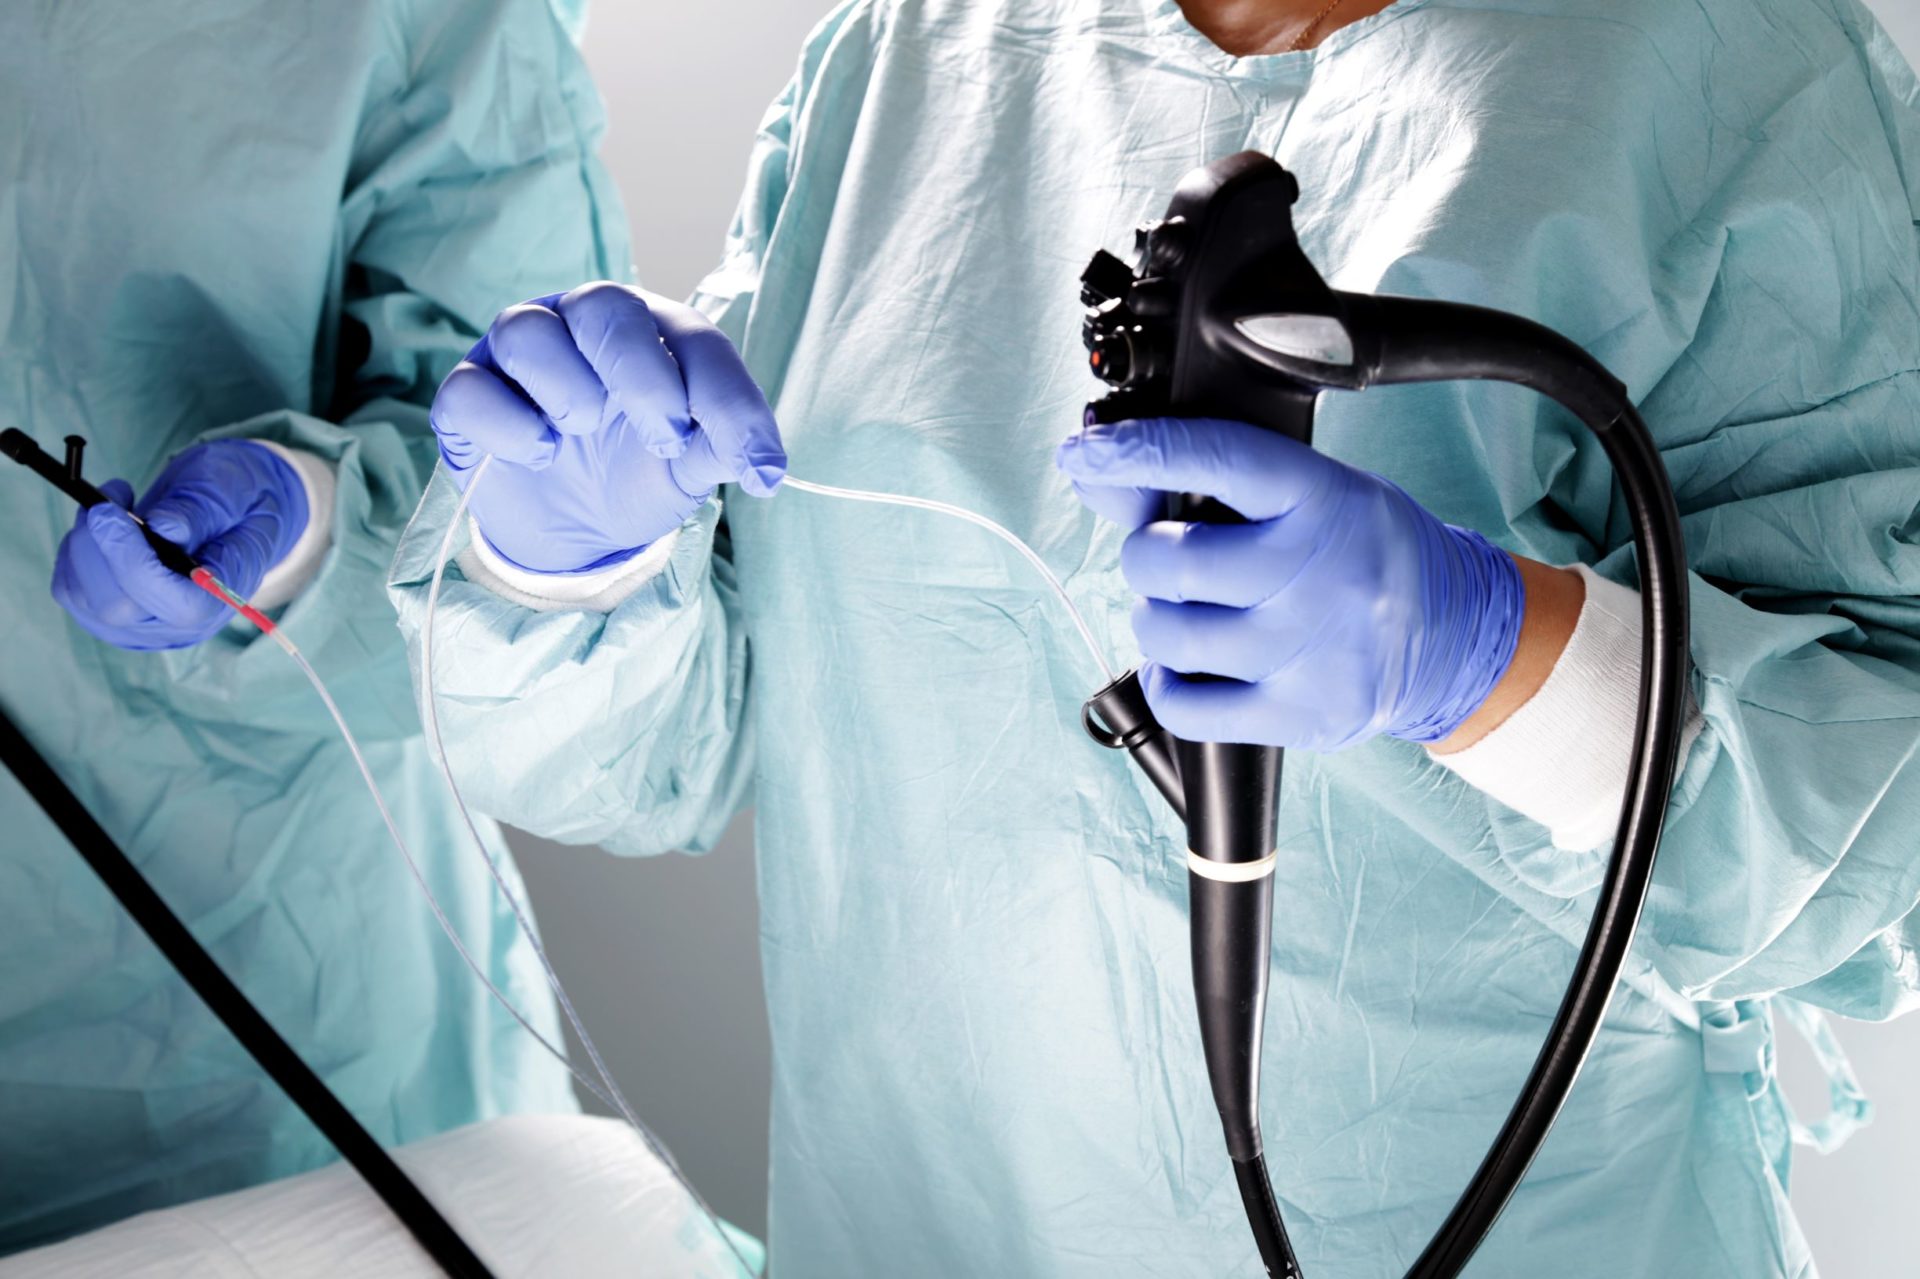 Endoscopy- Types, Why they are done, Risks and more